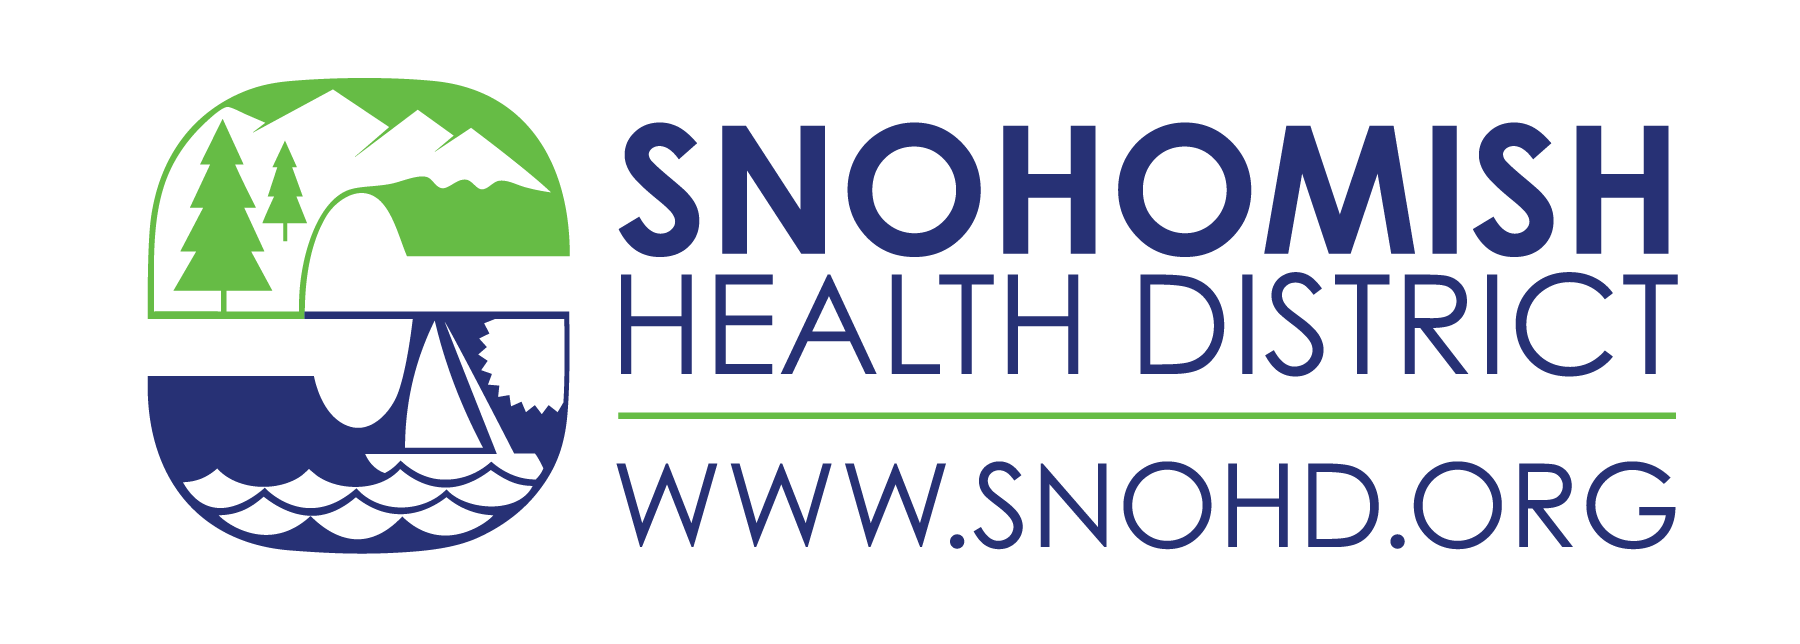 Snohomish Health District Vaccines - Ash Way Park and Ride - DO NOT USE Logo